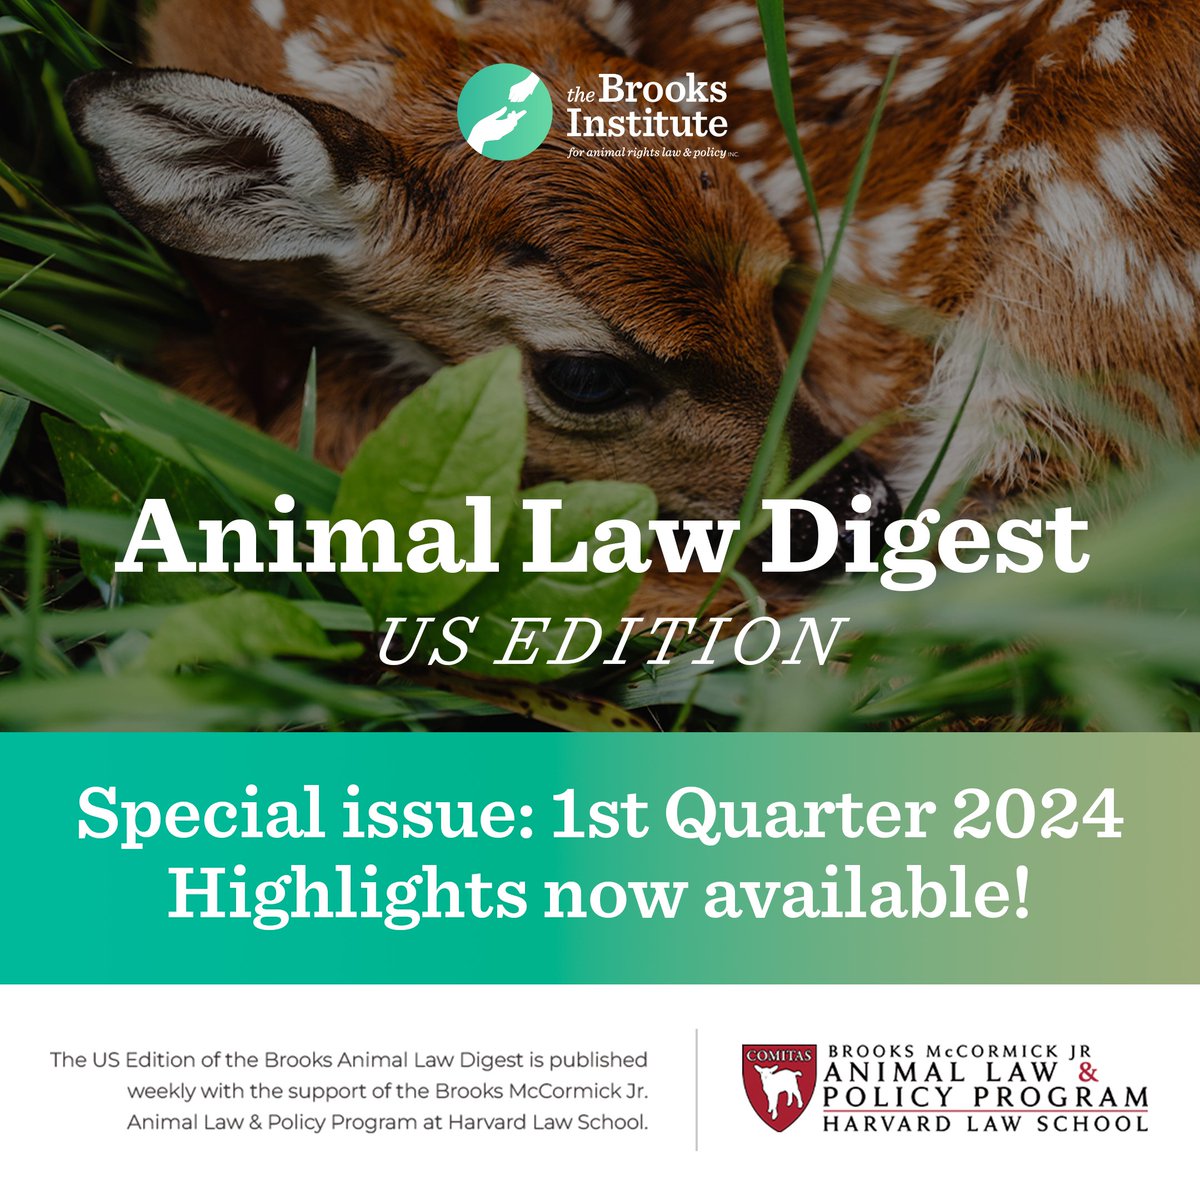 The Brooks Animal Law Digest - US Edition 1st Quarter 2024 Highlights are now available!

thebrooksinstitute.org/animal-law-dig…

---

Subscribe to the Brooks Animal Law Digest at thebrooksinstitute.org/subscribe⁠

#animallaw #animalpolicy #thebrooksinstitute #animallawandpolicy #animalprotection